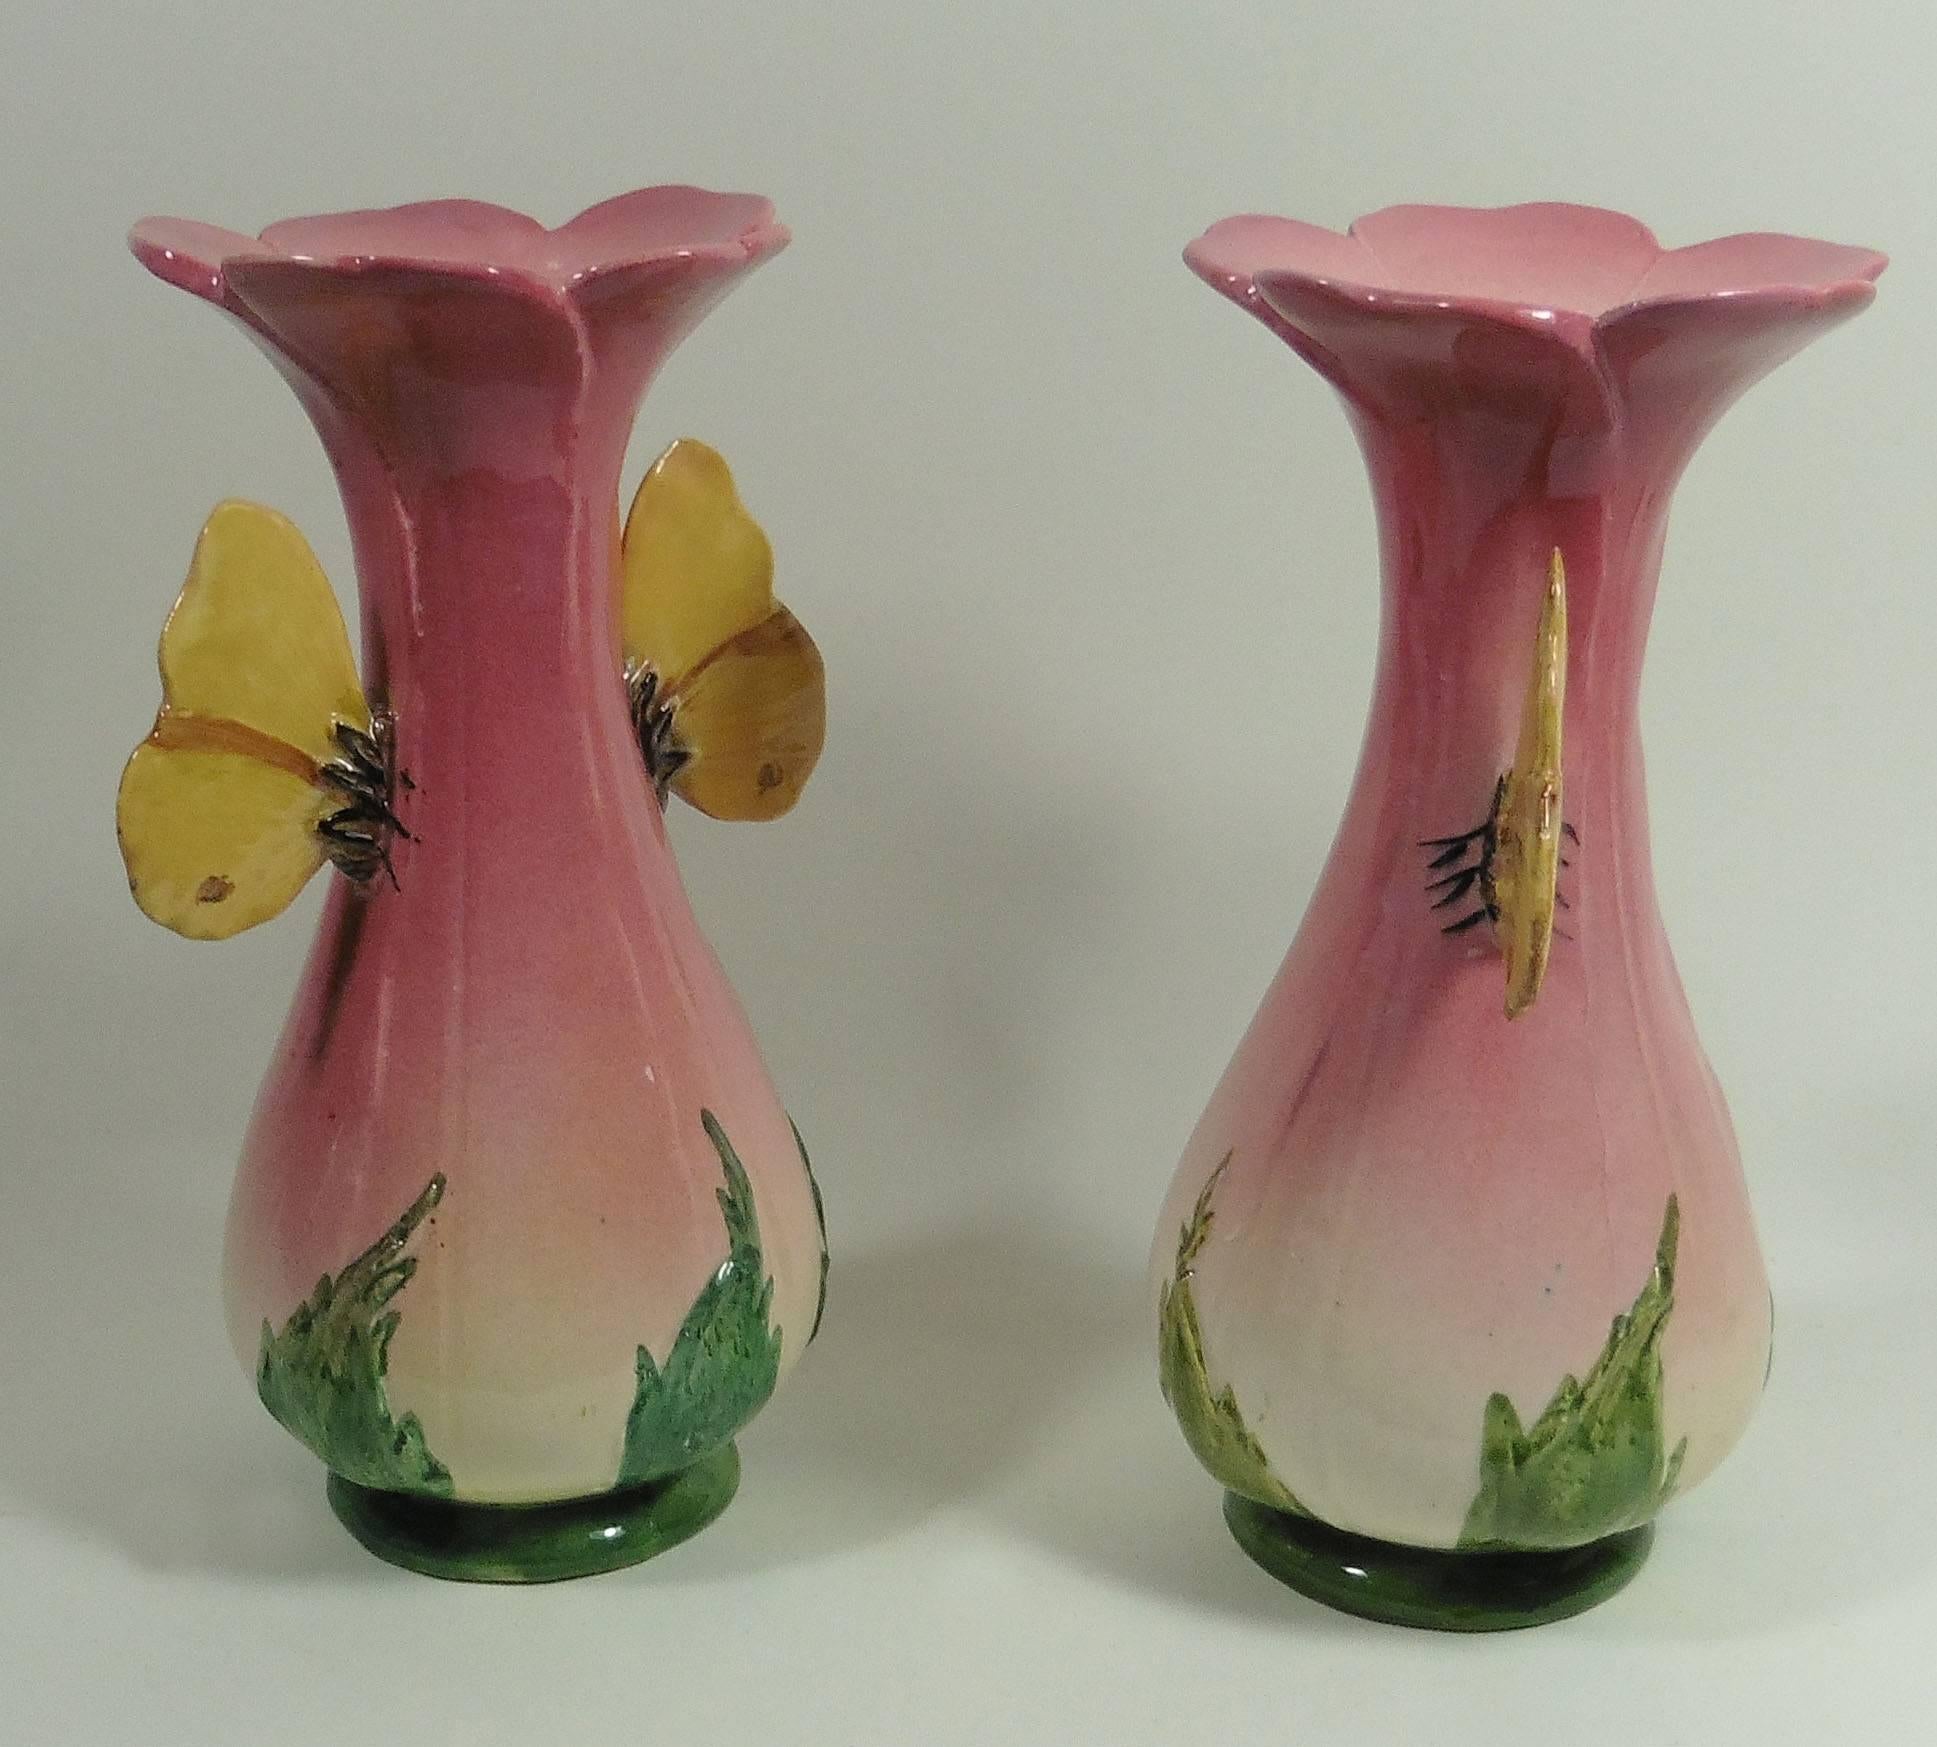 Rare pair of majolica pink vases with yellow butterflies handles signed Delphin Massier, circa 1890.
The Massier are known for the quality of their unique enamels and paintings. The Massier family produced different pieces with birds in a very